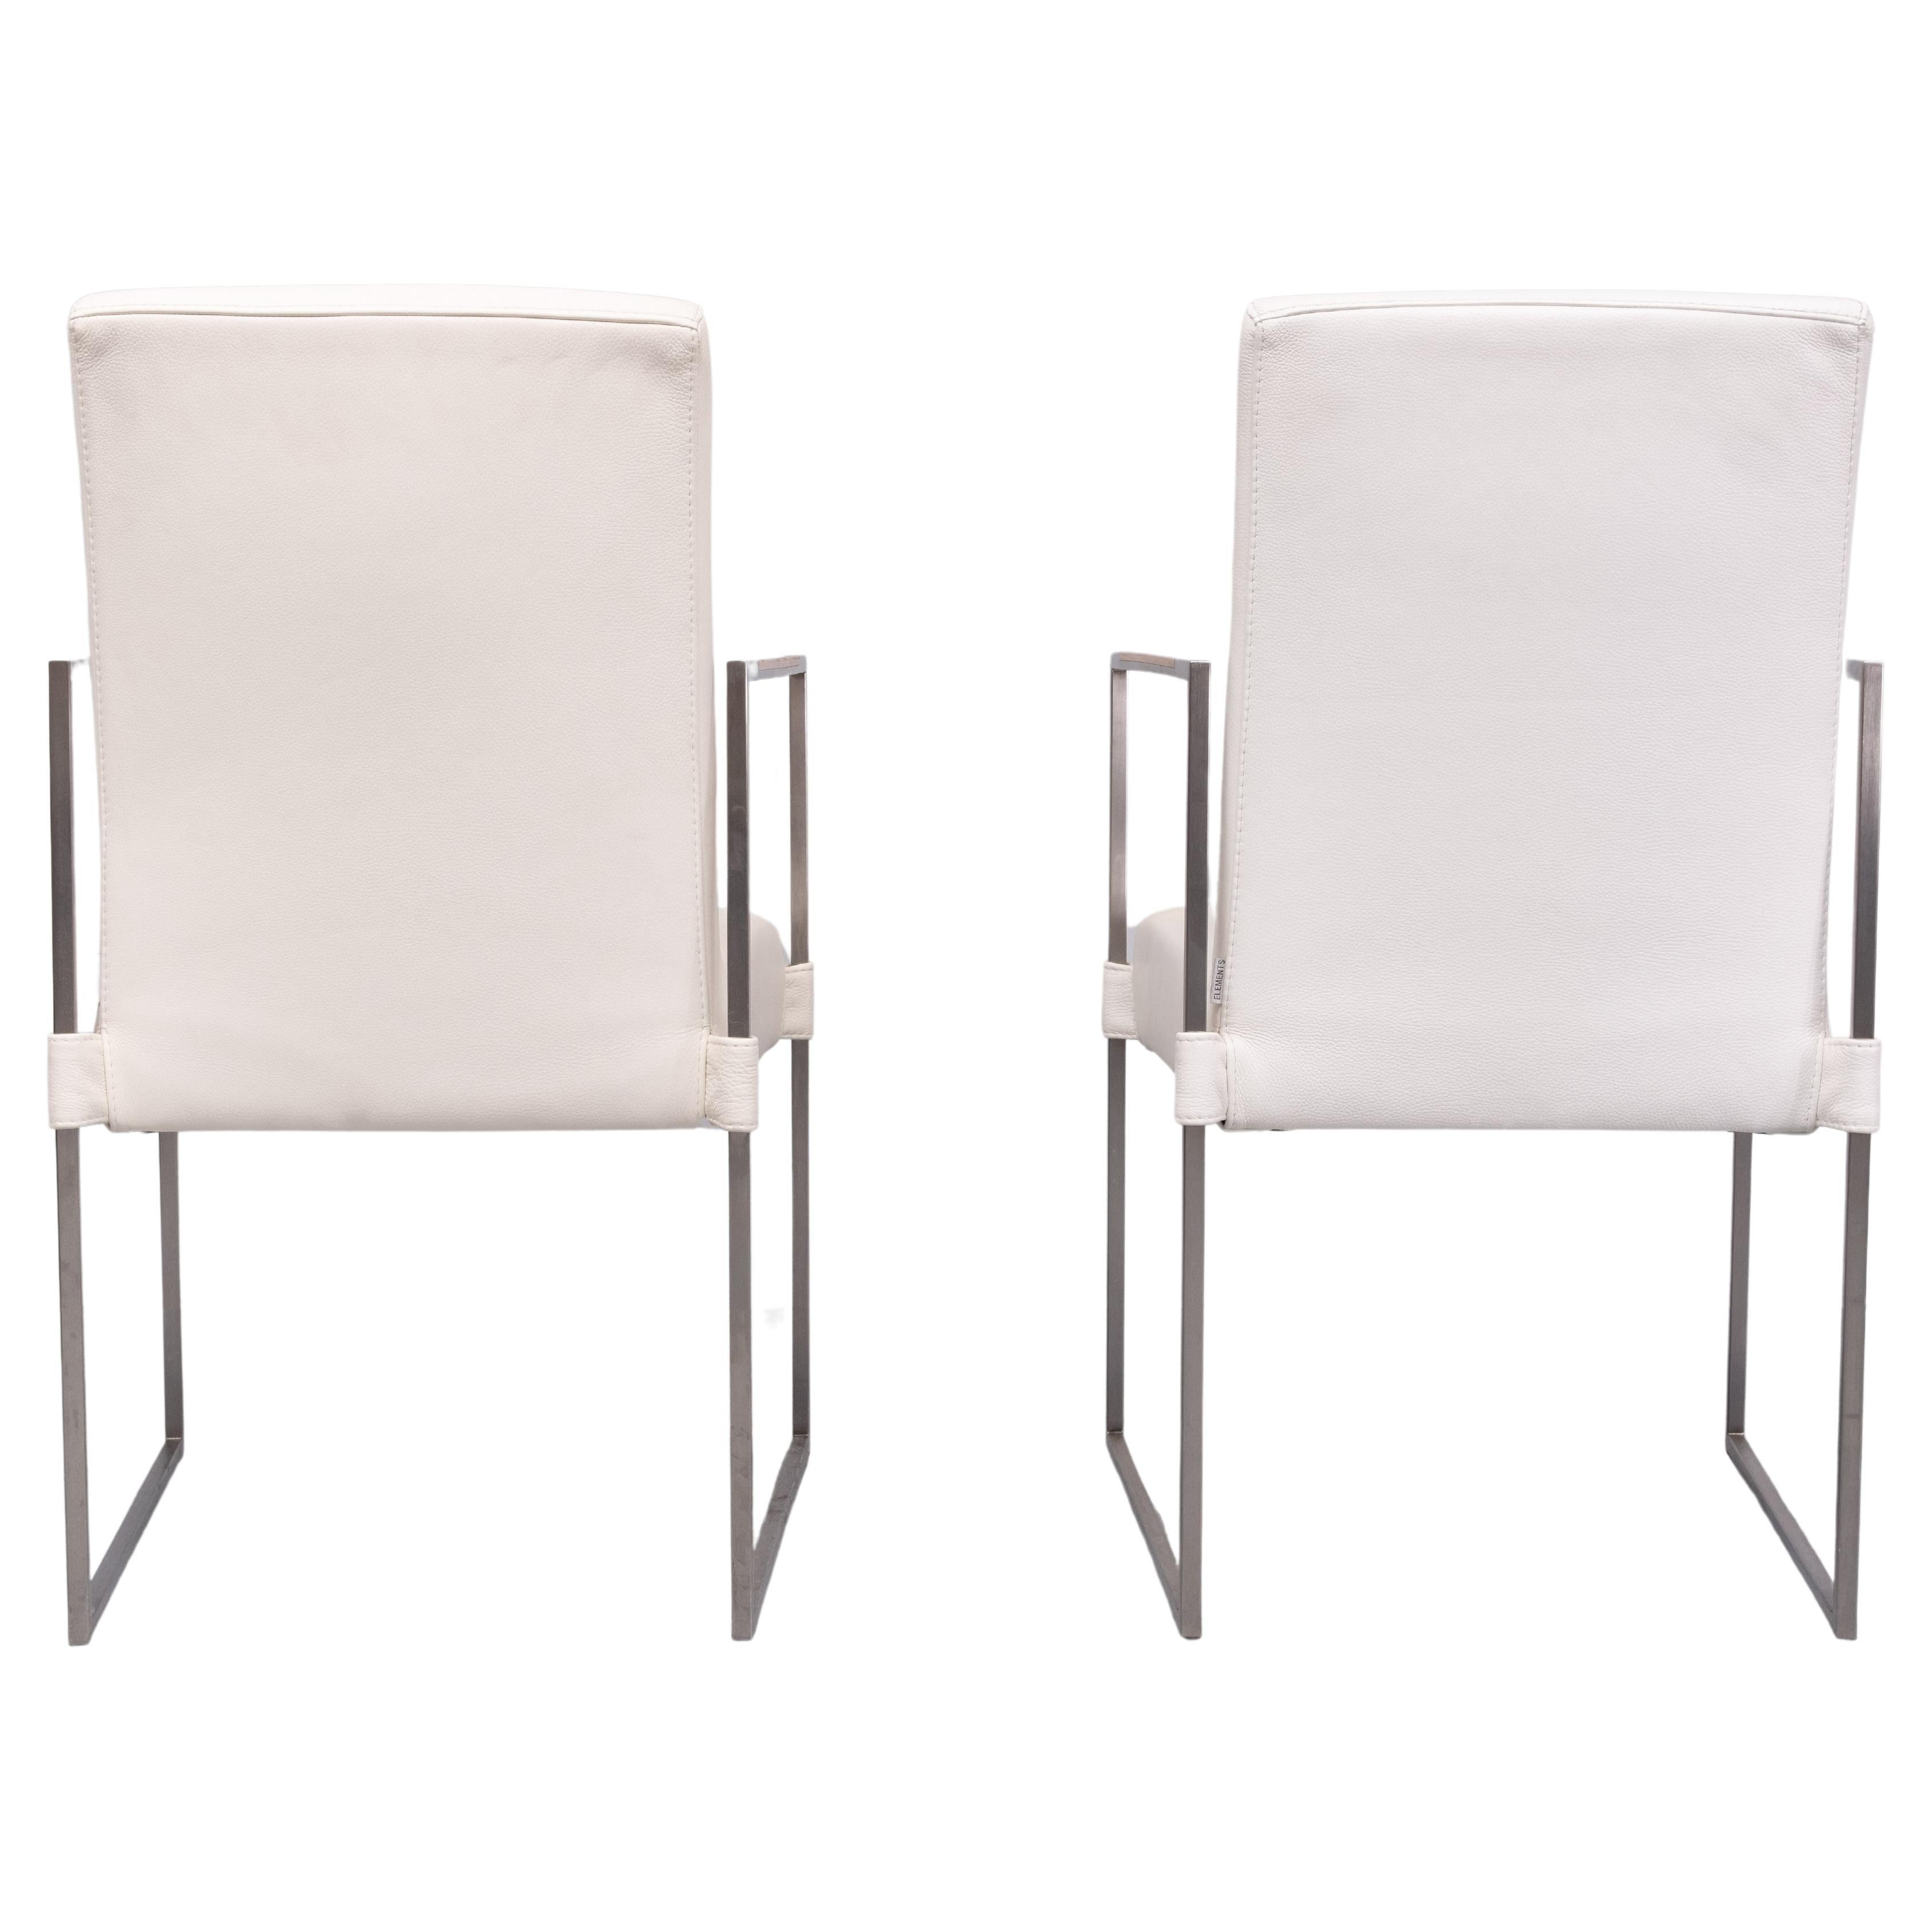 Very nice pair of adjustable armchairs . Polished Aluminum 
square frame ,with Wood armrests inserts  ,comes with a White Leather upholstery . Adjustable backrest . by pulling a lever underneath the seat  Looks like a Milo Baughman design . However